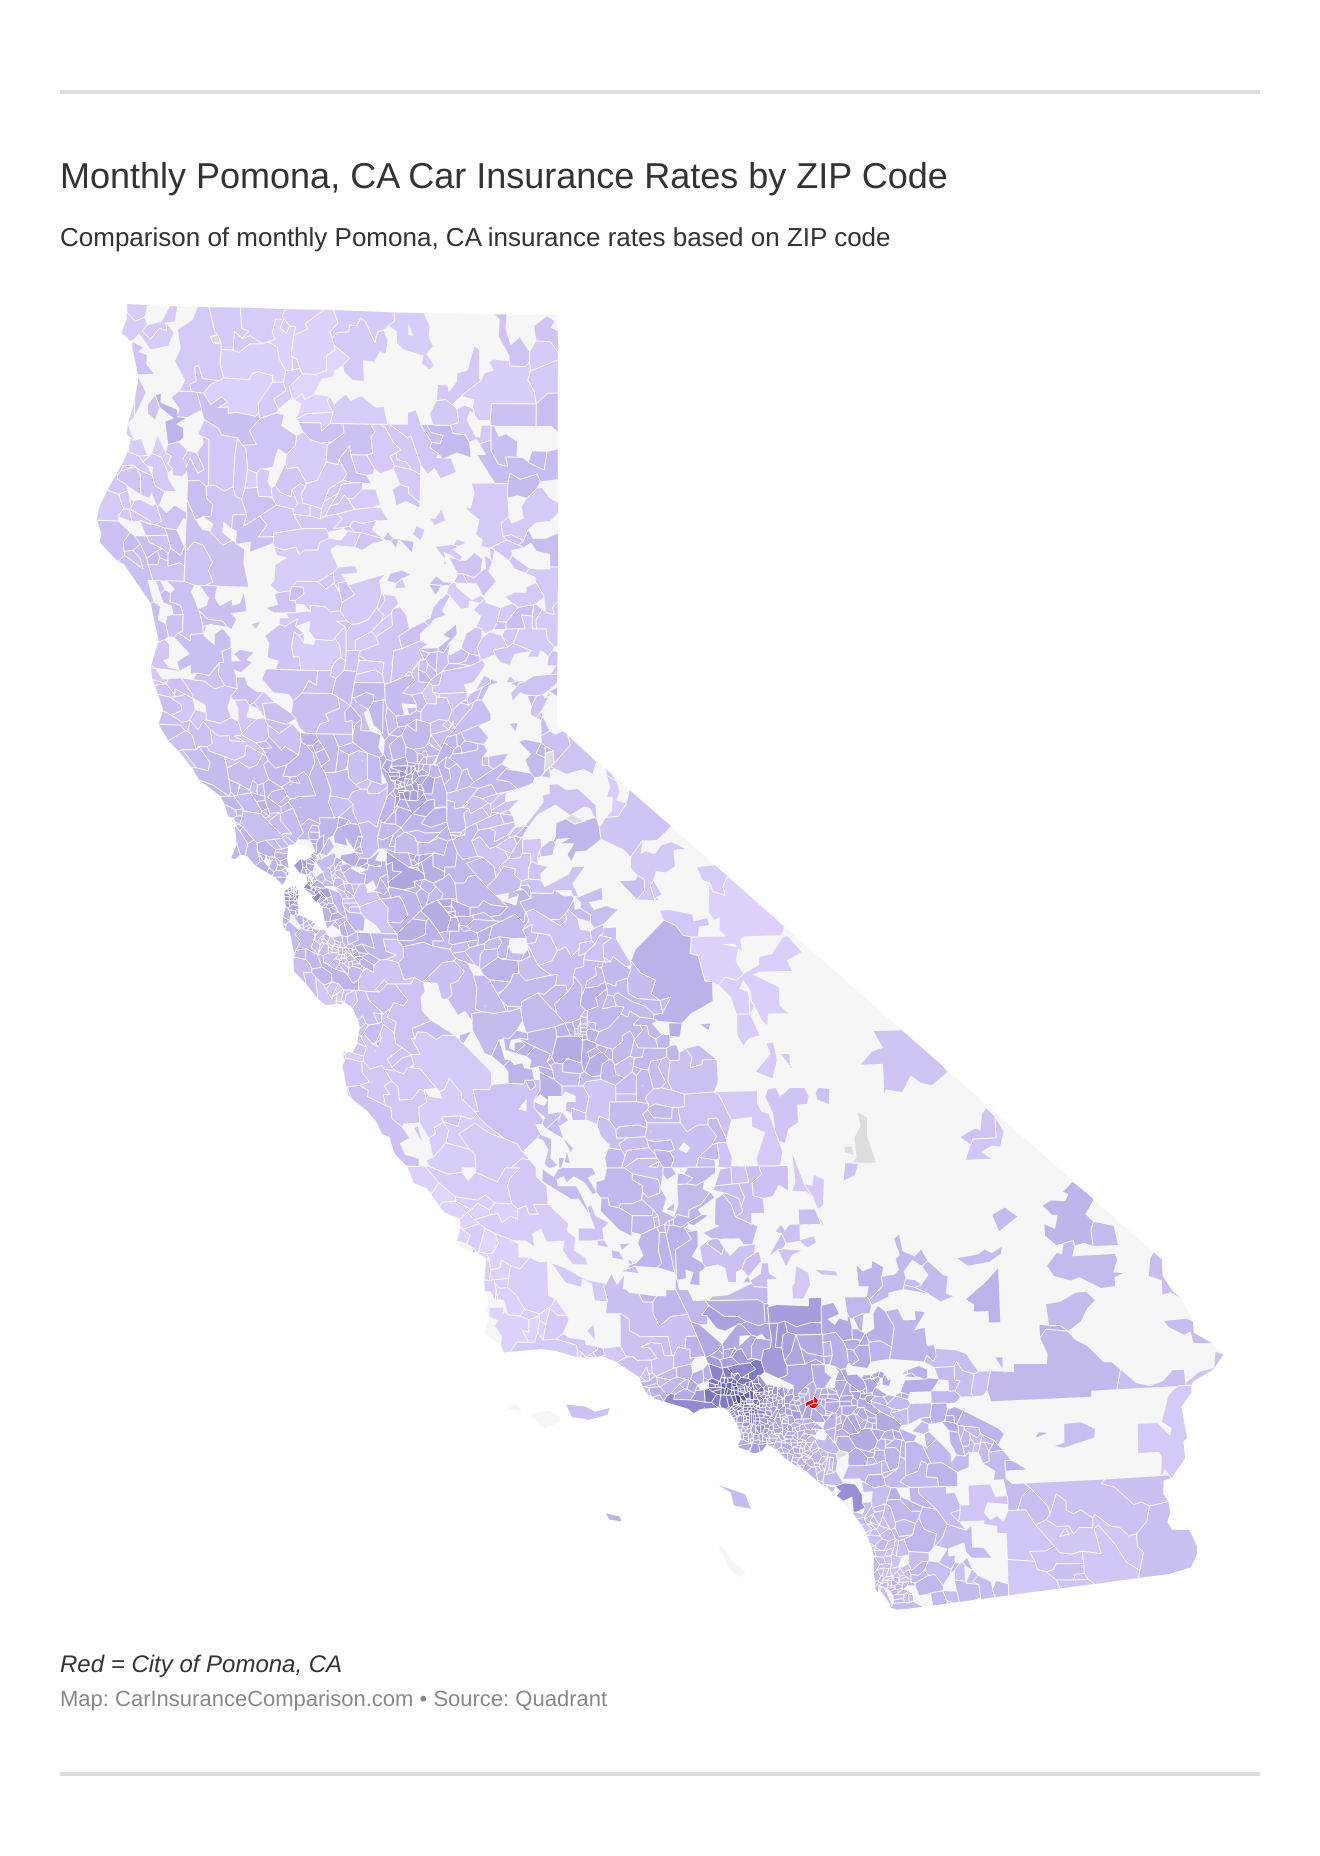 Monthly Pomona, CA Car Insurance Rates by ZIP Code